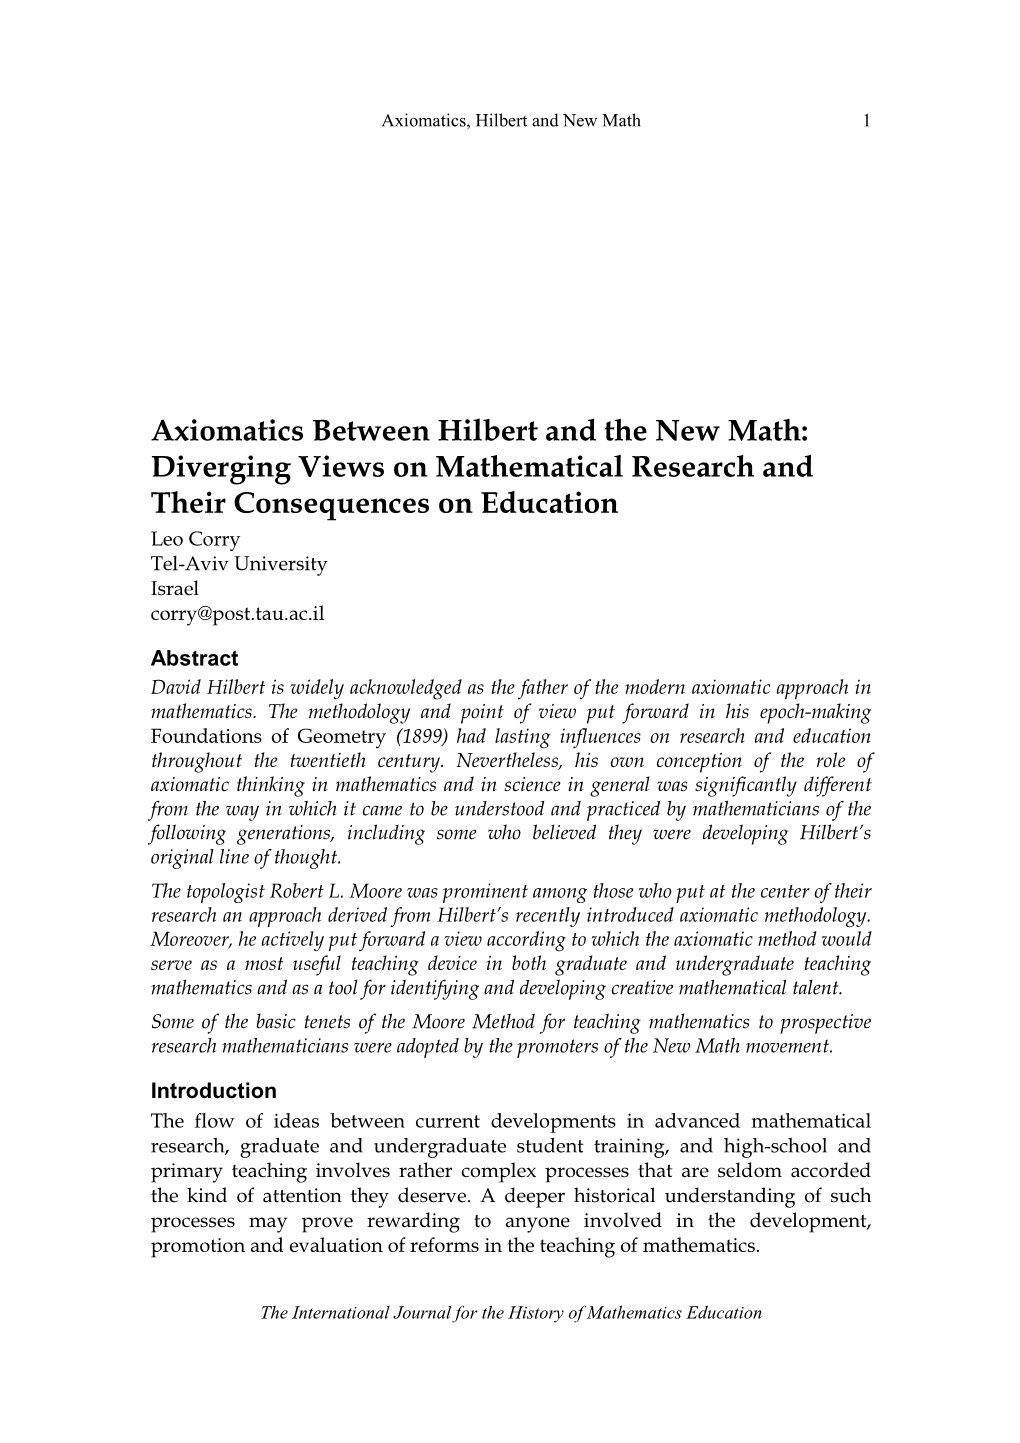 Axiomatics Between Hilbert and the New Math: Diverging Views On